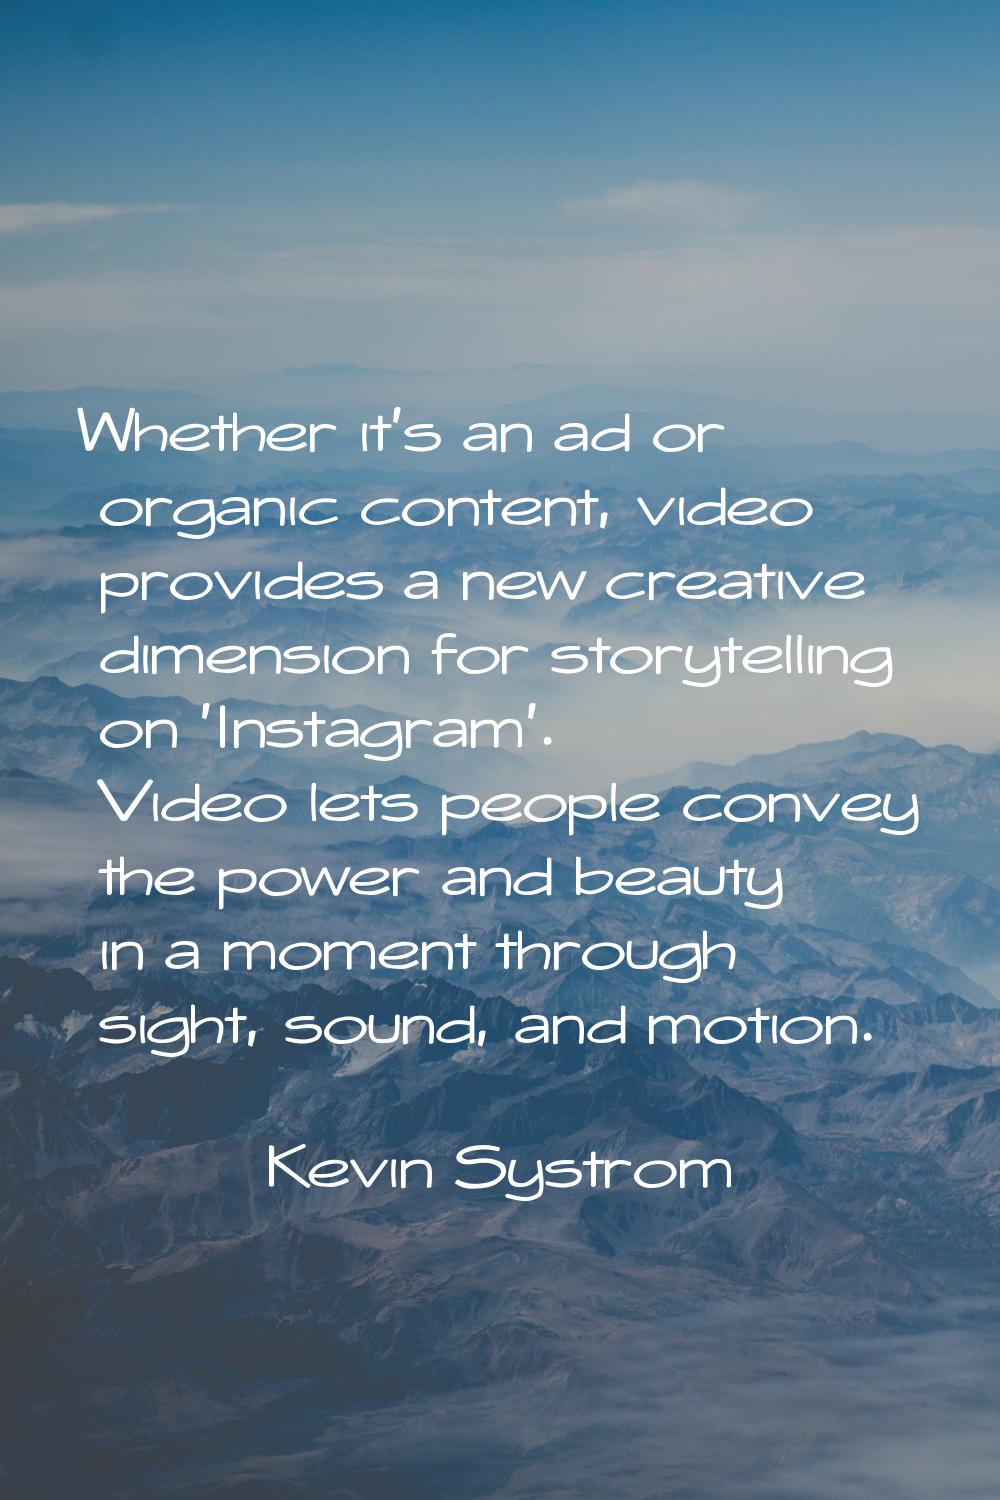 Whether it's an ad or organic content, video provides a new creative dimension for storytelling on 